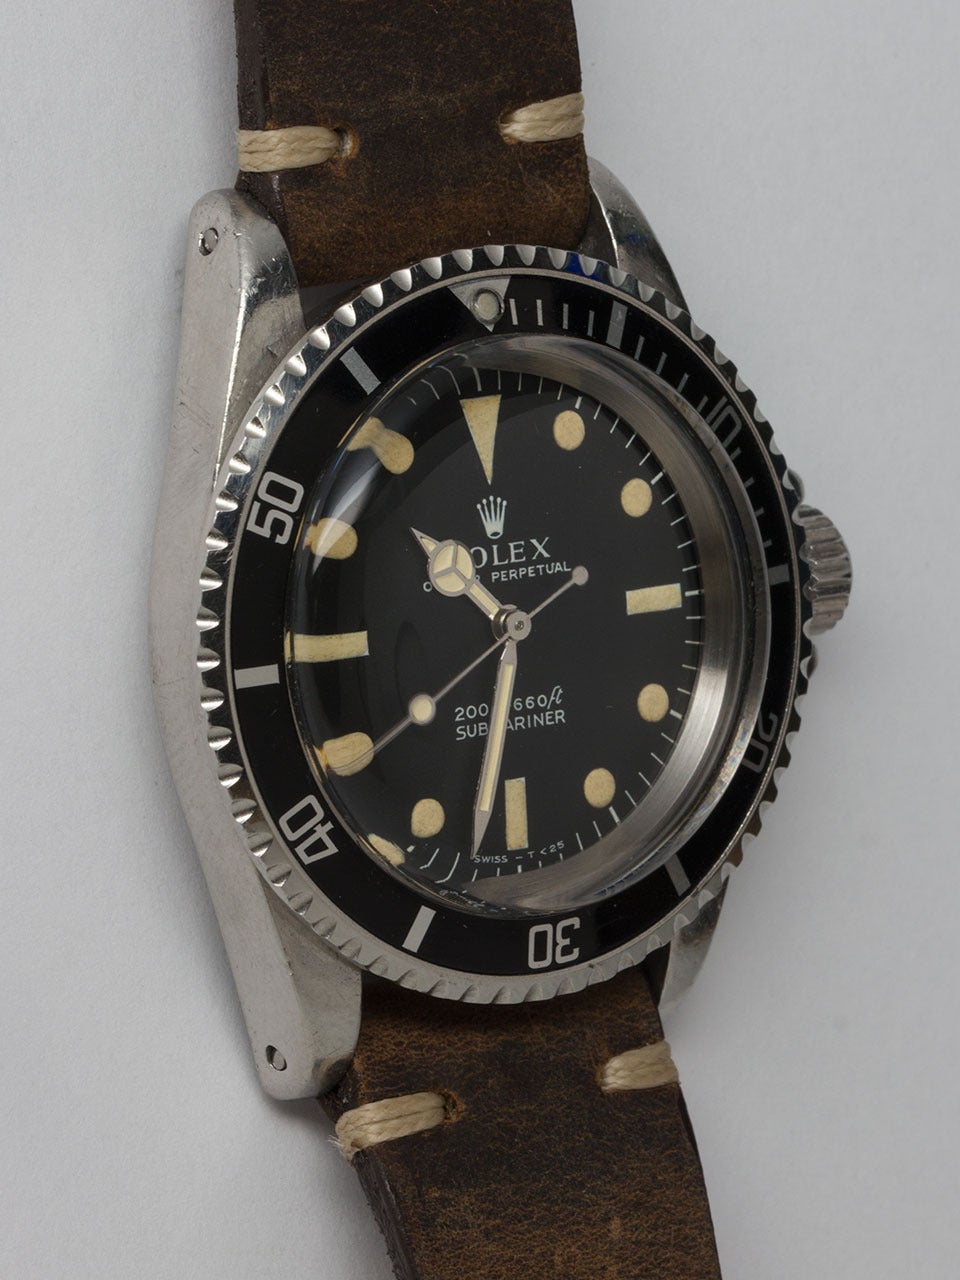 Rolex Stainless Steel Submariner ref 5513 serial #1.8 million circa 1967. 40mm diameter Oyster case, wear consistent with a watch that was well loved and worn probably as an every day watch for a number of years. Well loved, but not beat! Pleasing